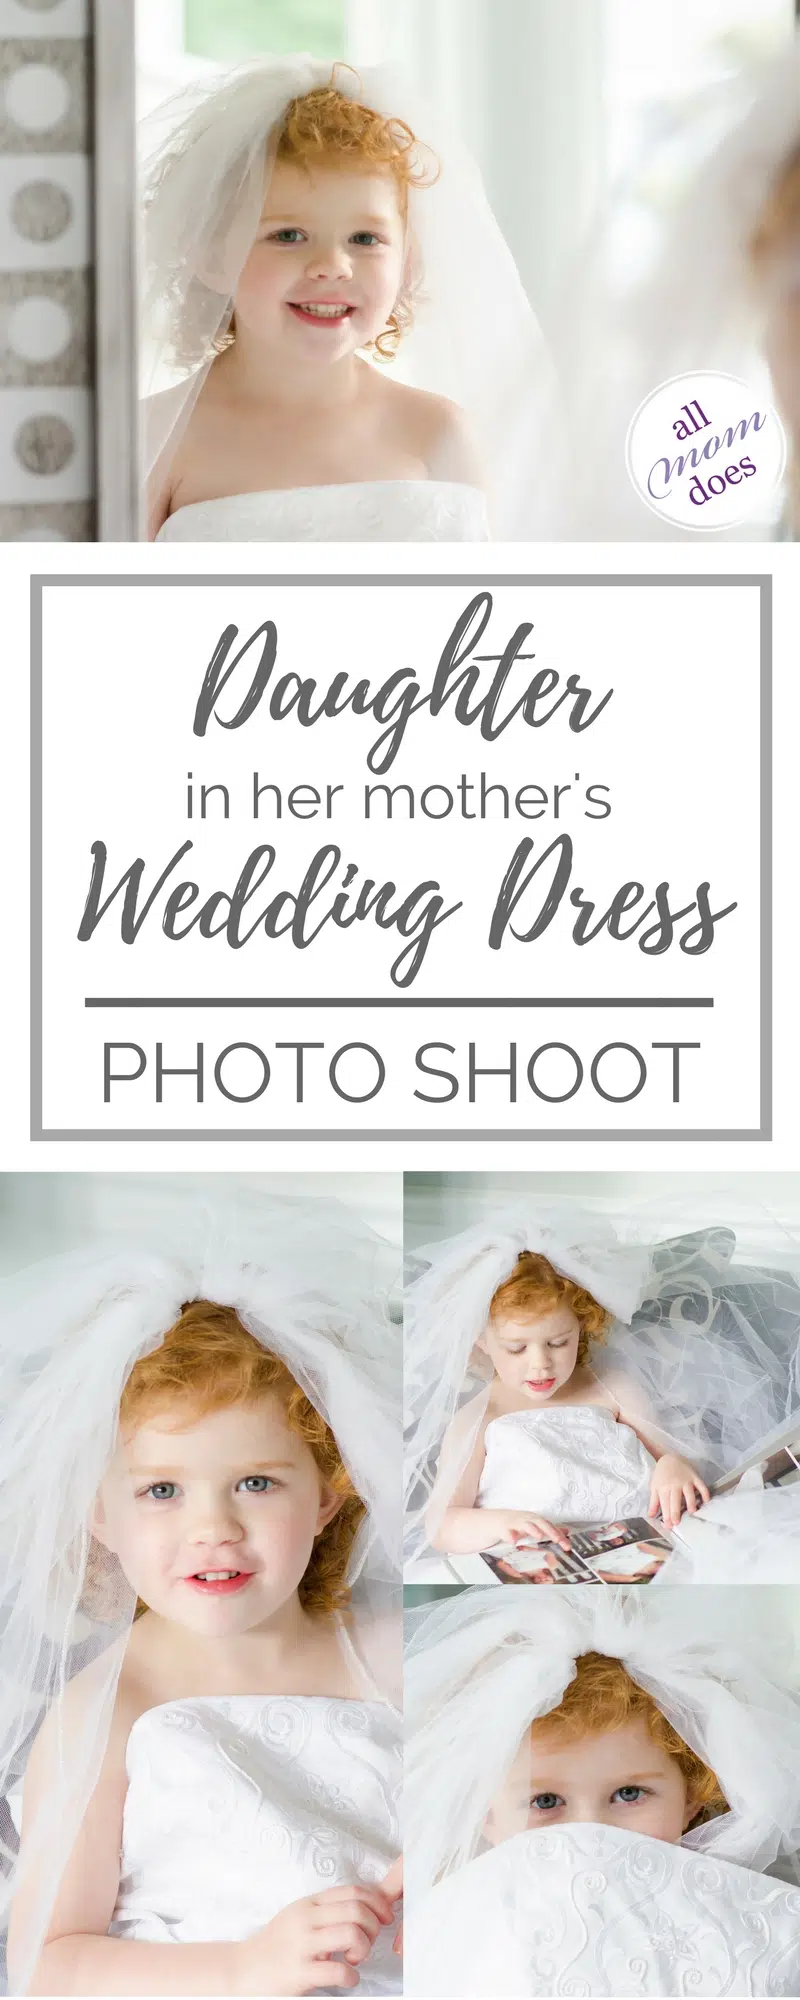 Little girl in her mother's wedding dress - do a wedding dress photo shoot with your daughter! So sweet! #weddingdress #mamasgirl #daughter